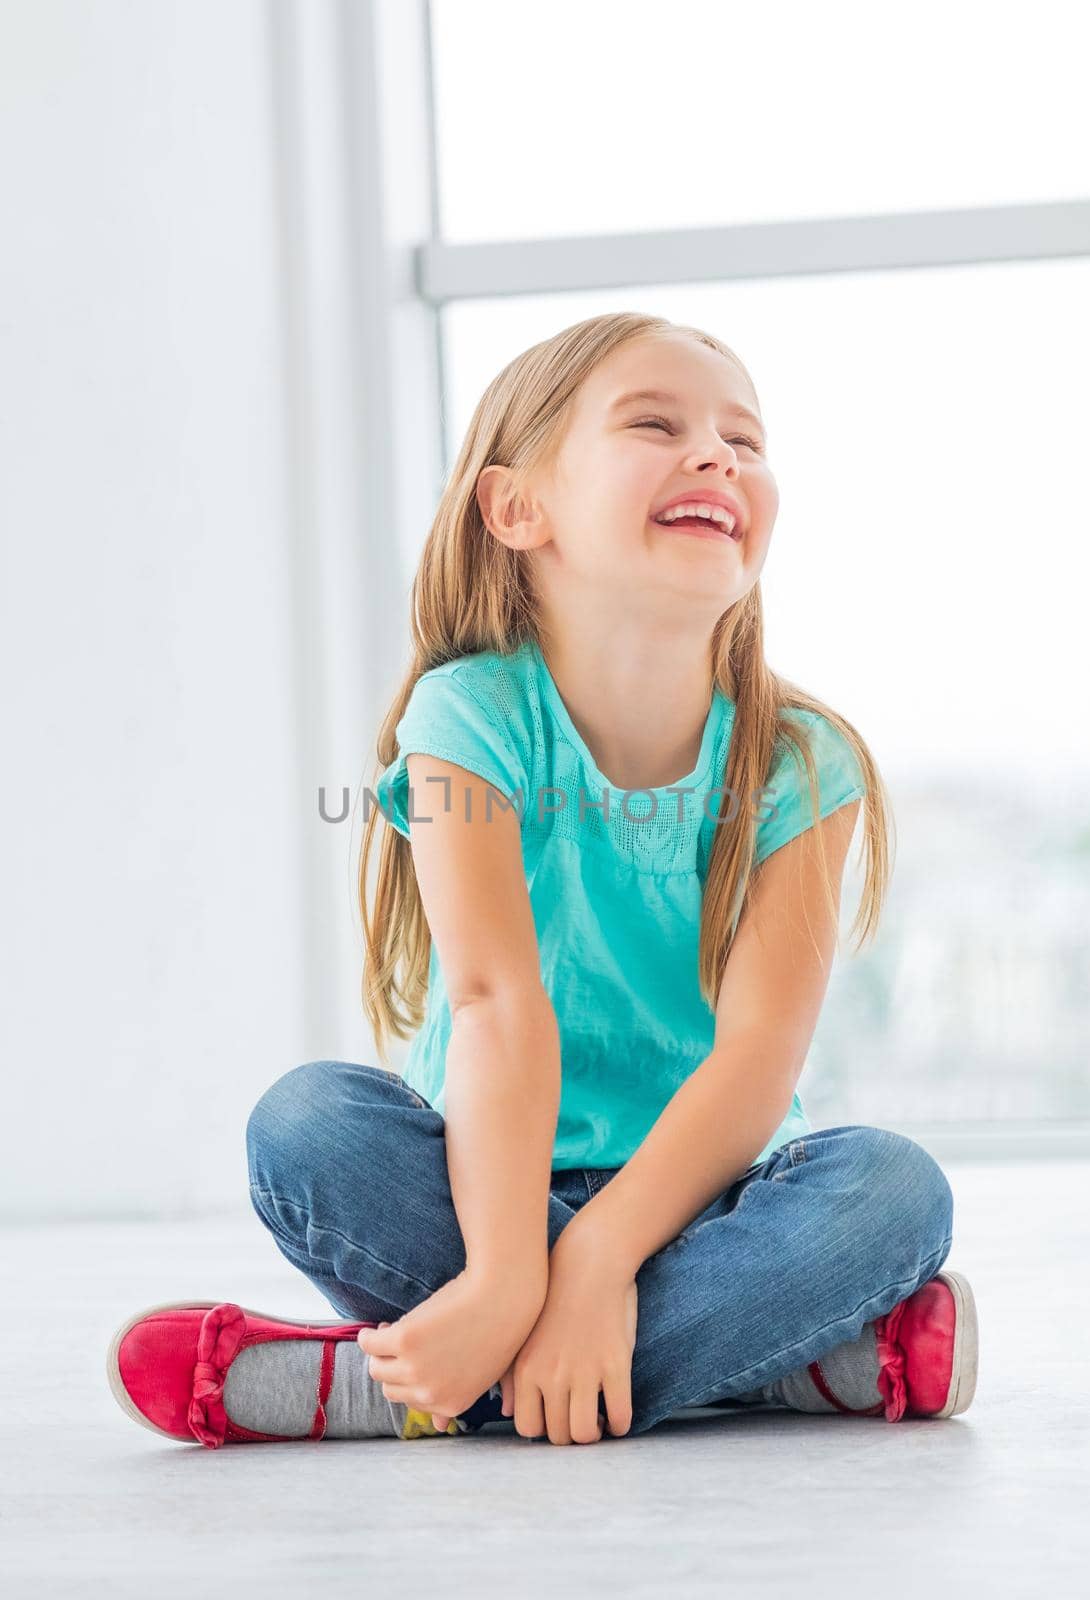 Blonde laughing little girl sits in light room.